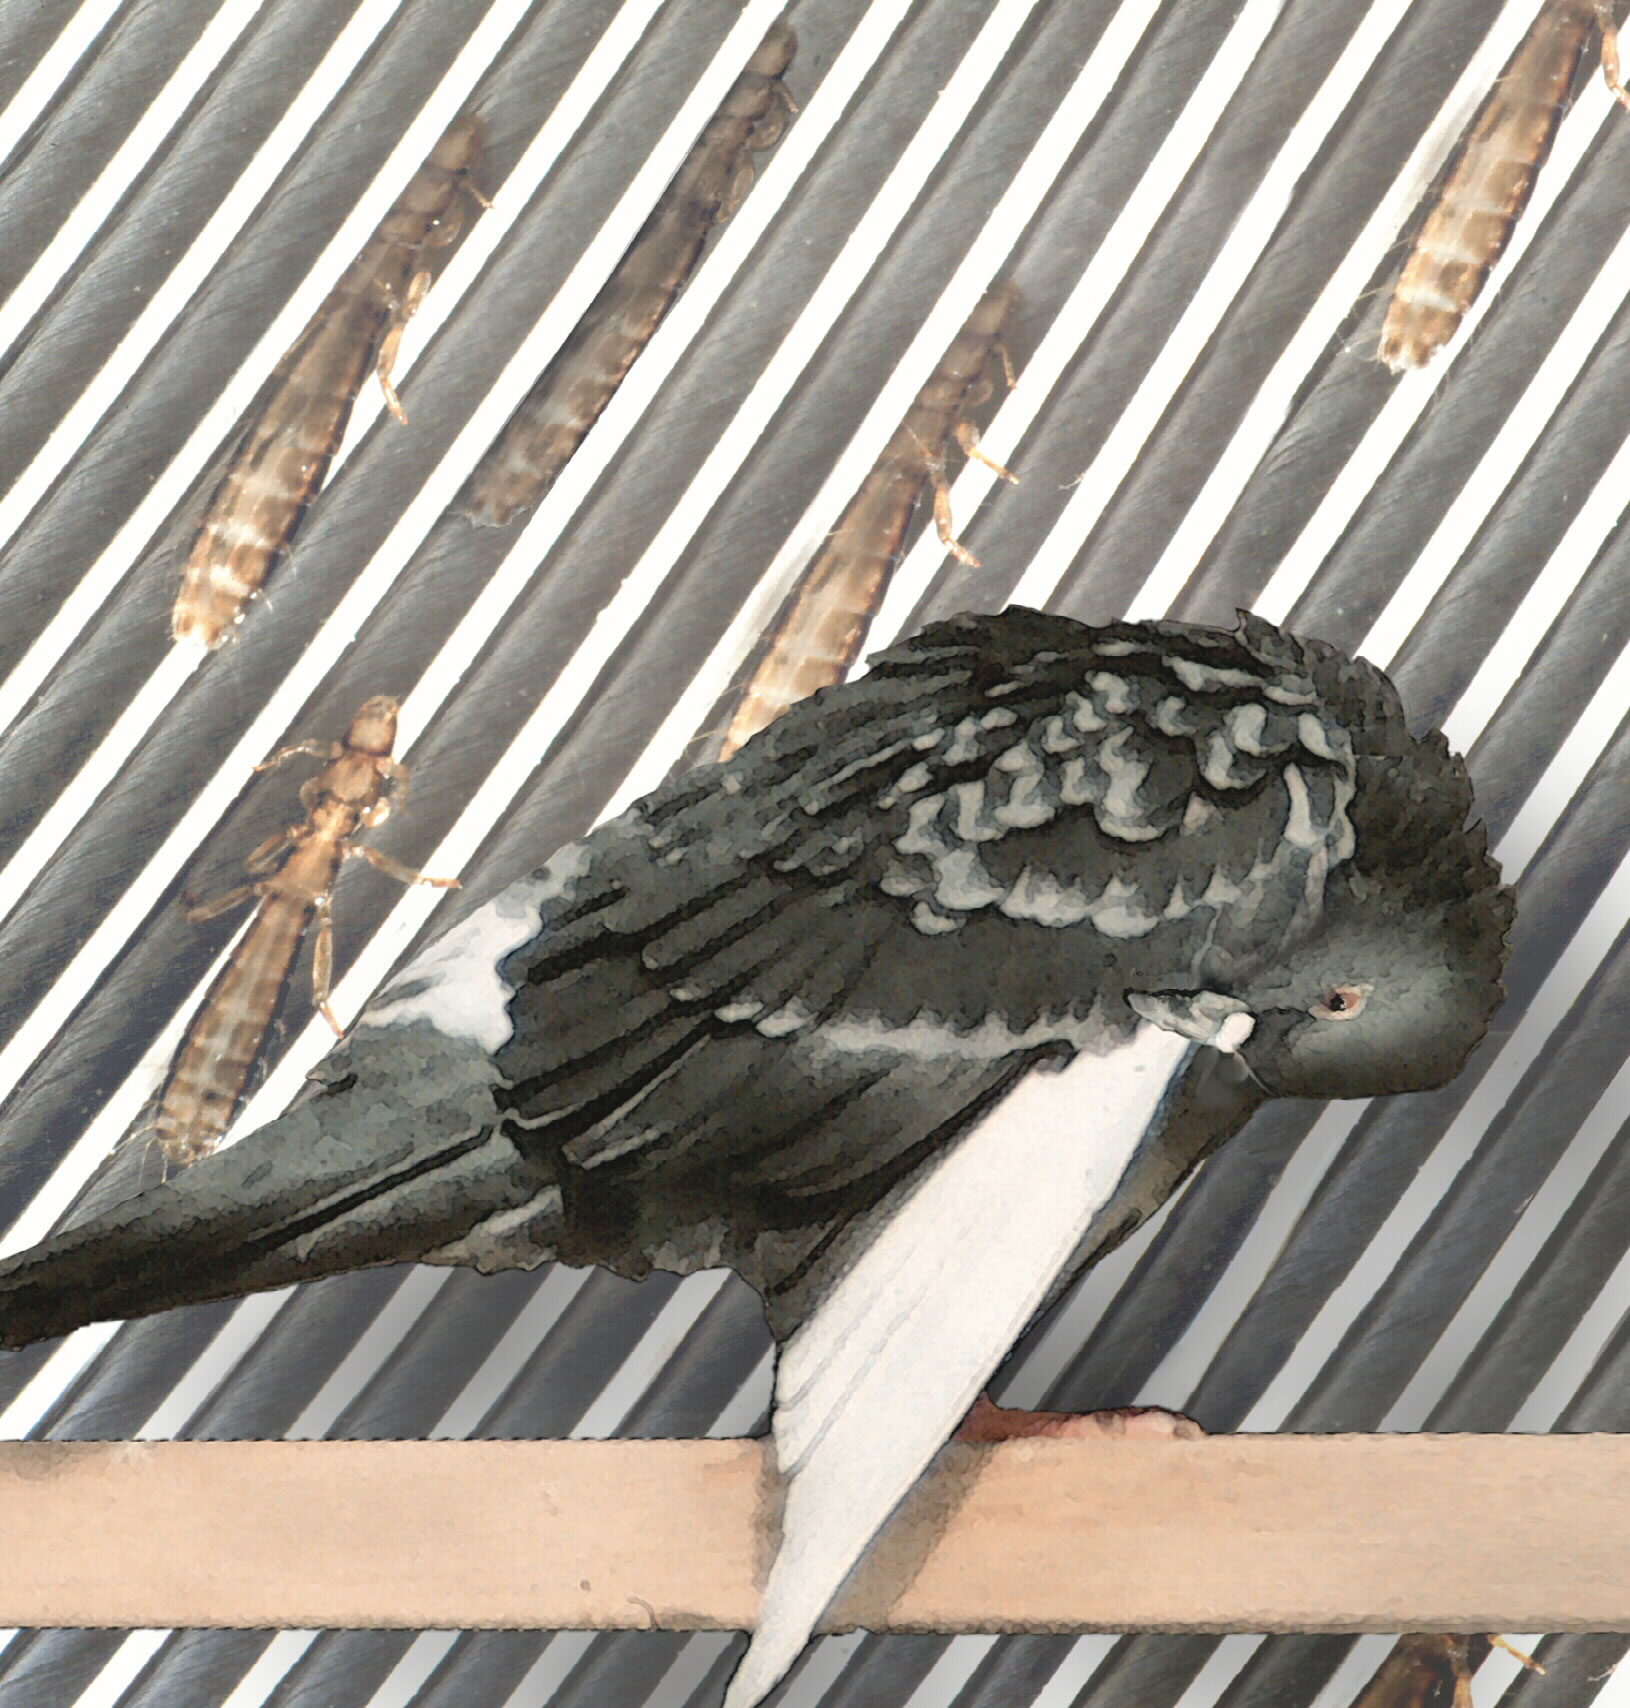 In this composite photograph, a rock pigeon preening its feathers is superimposed on a closeup image of a rock pigeon feather with lice trying to hide between feather branches to escape preening.